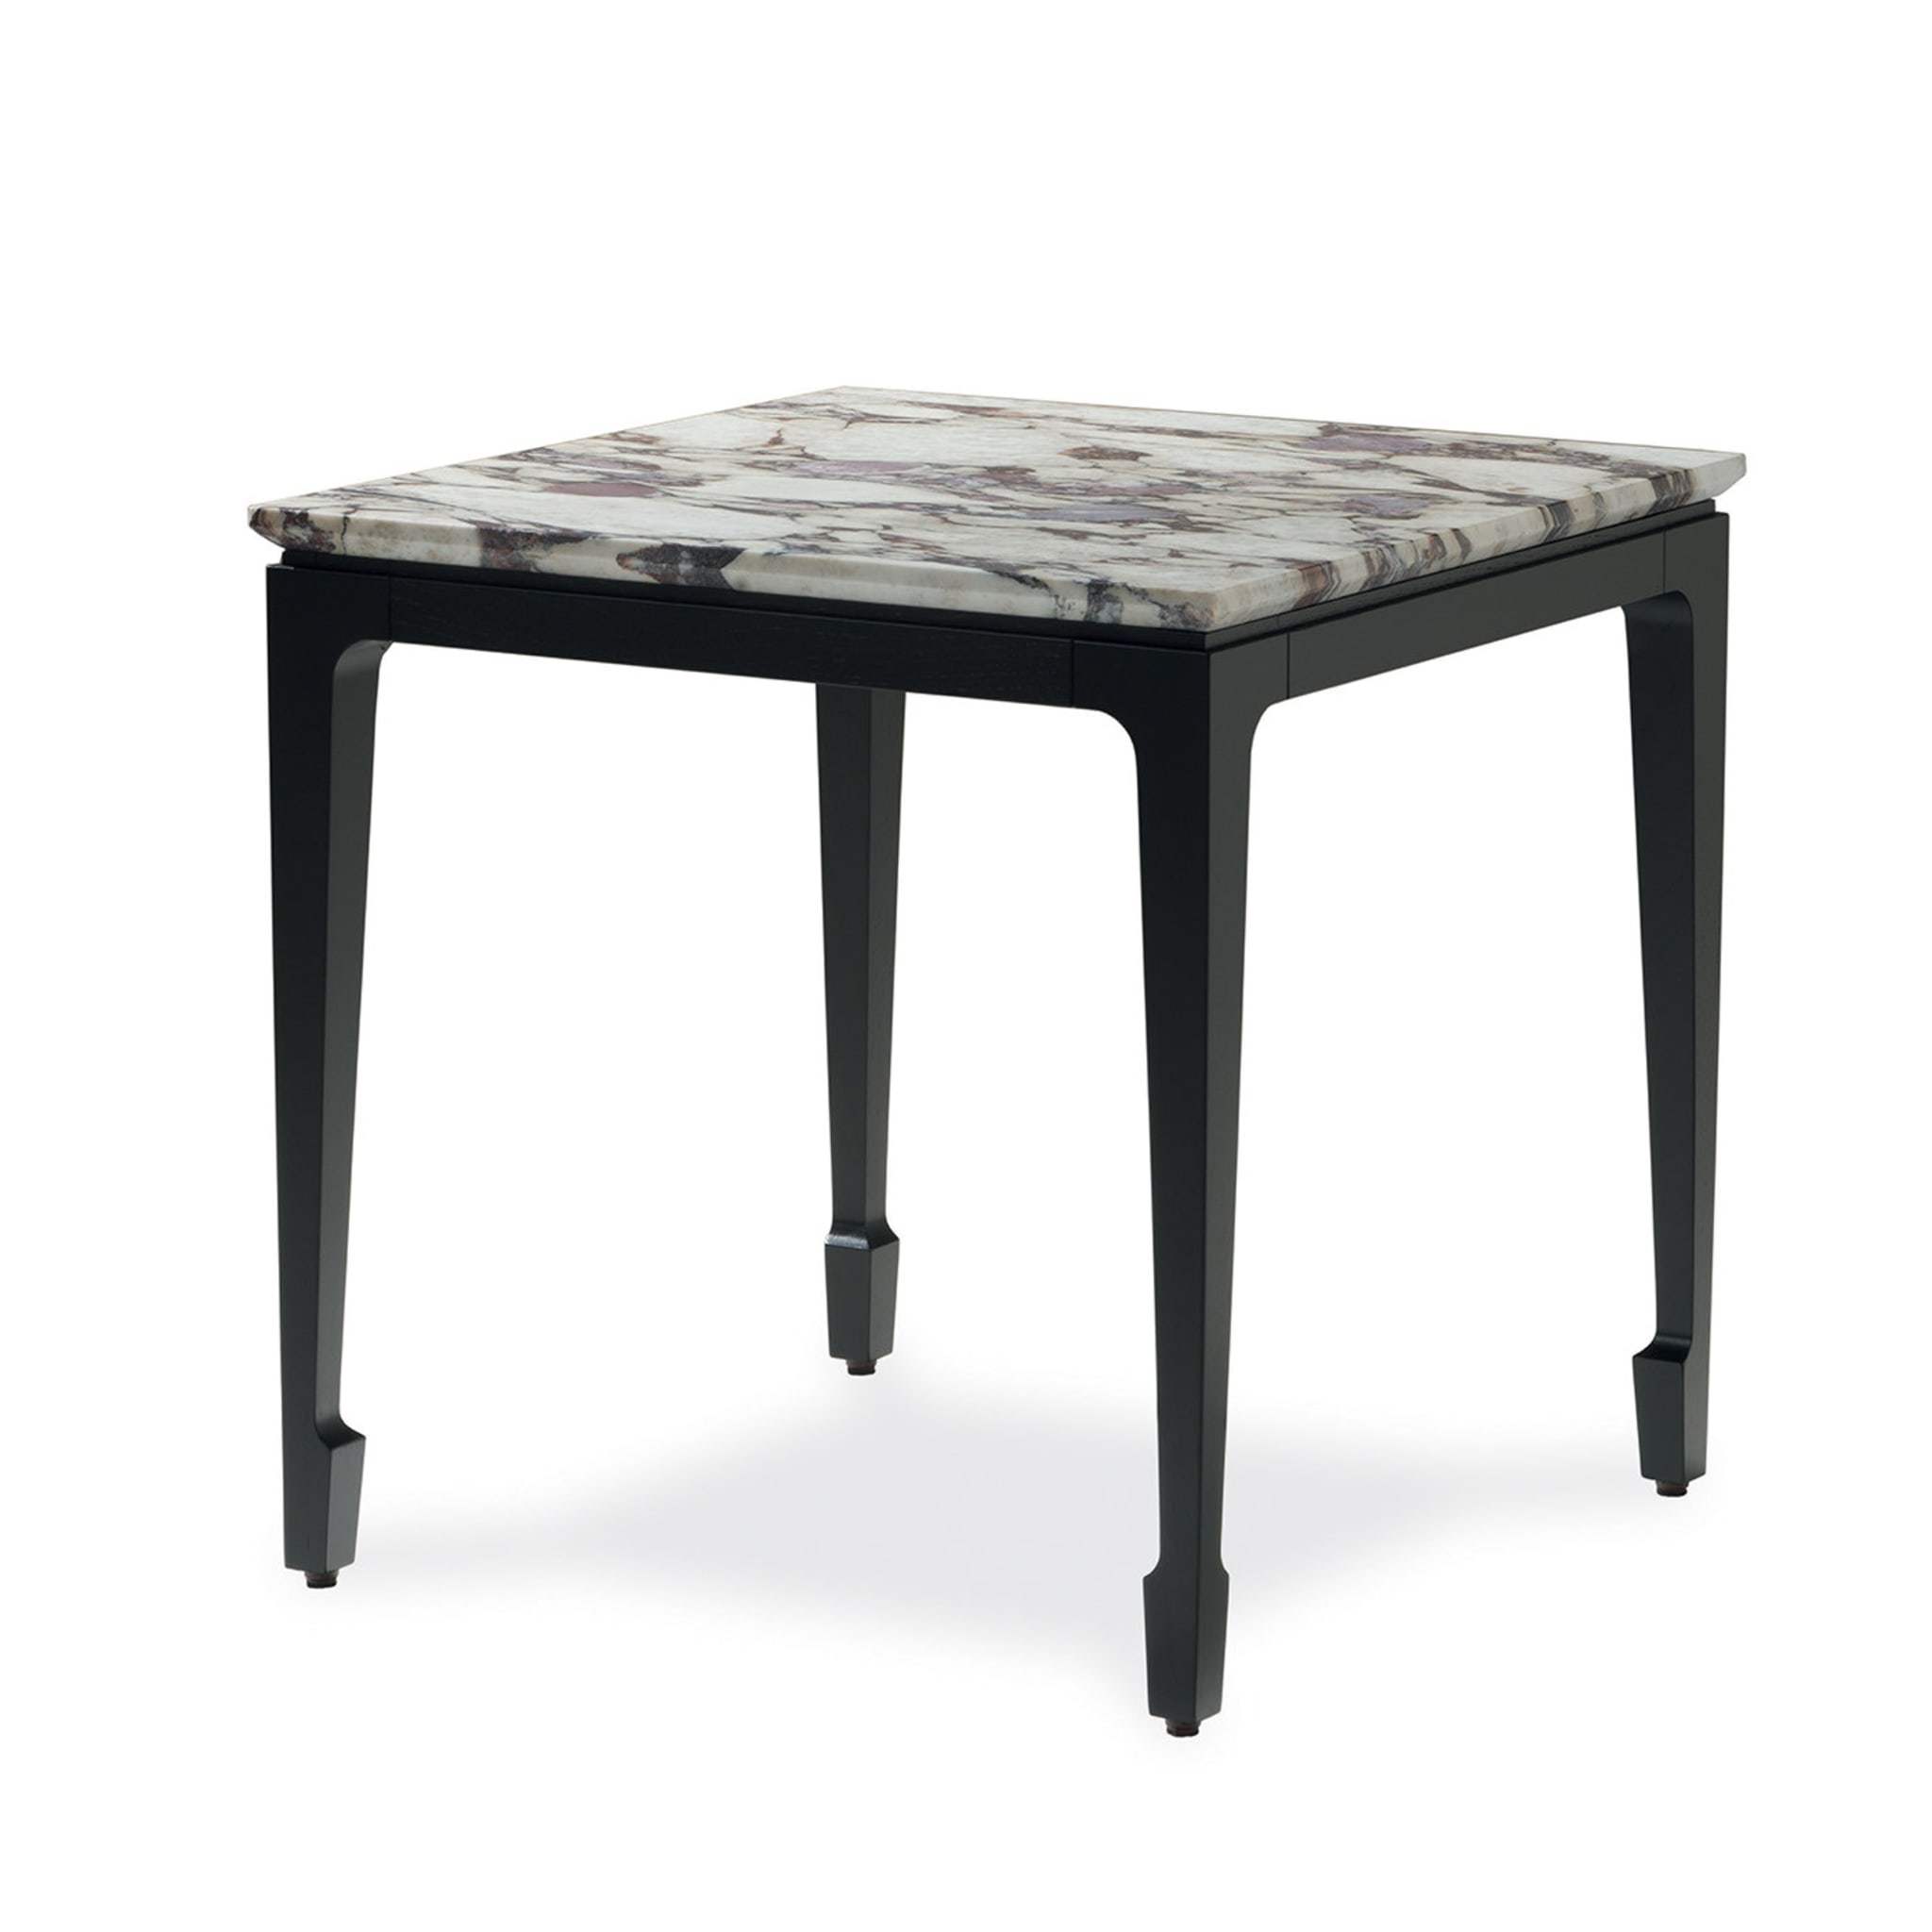 Yang small side table - Alternative view 1